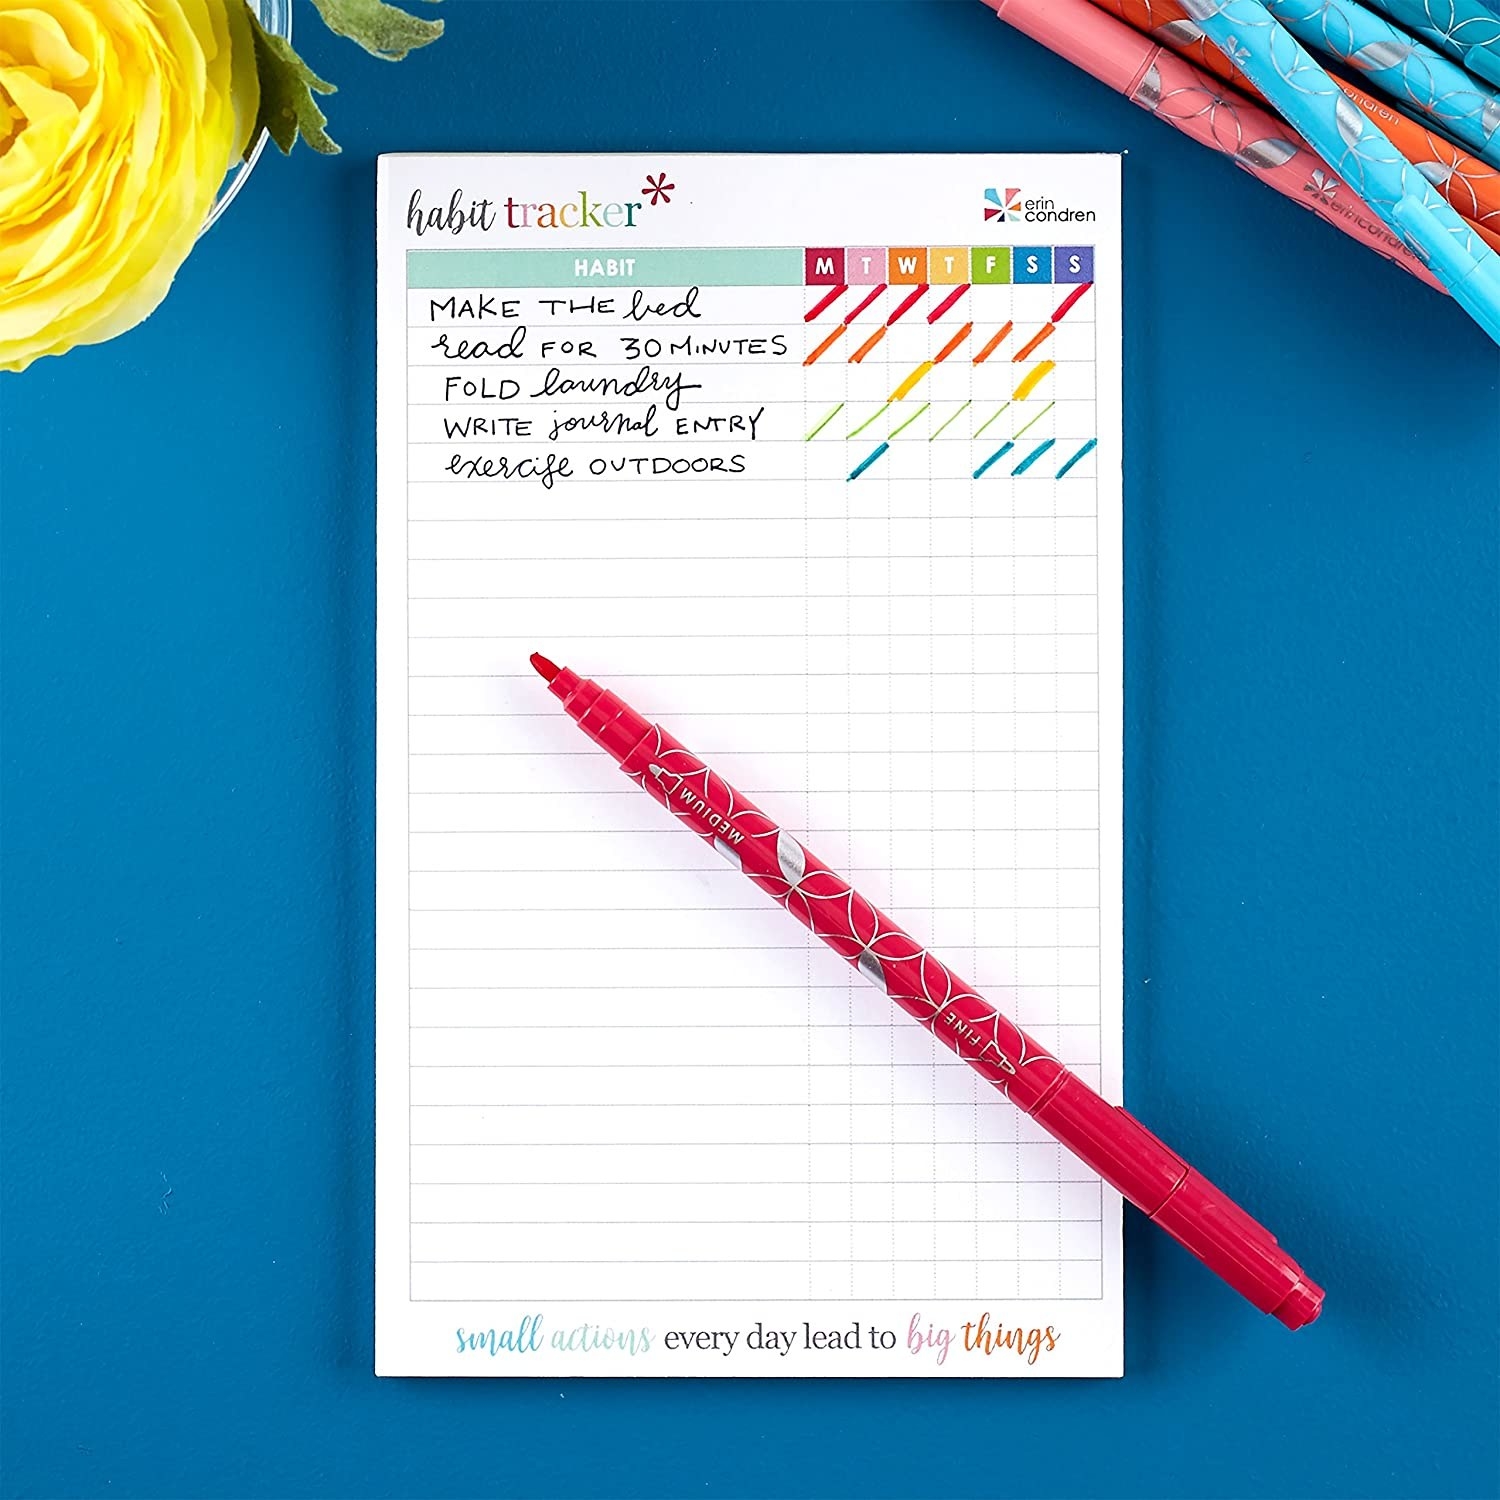 The habit tracker with a marker on top of it